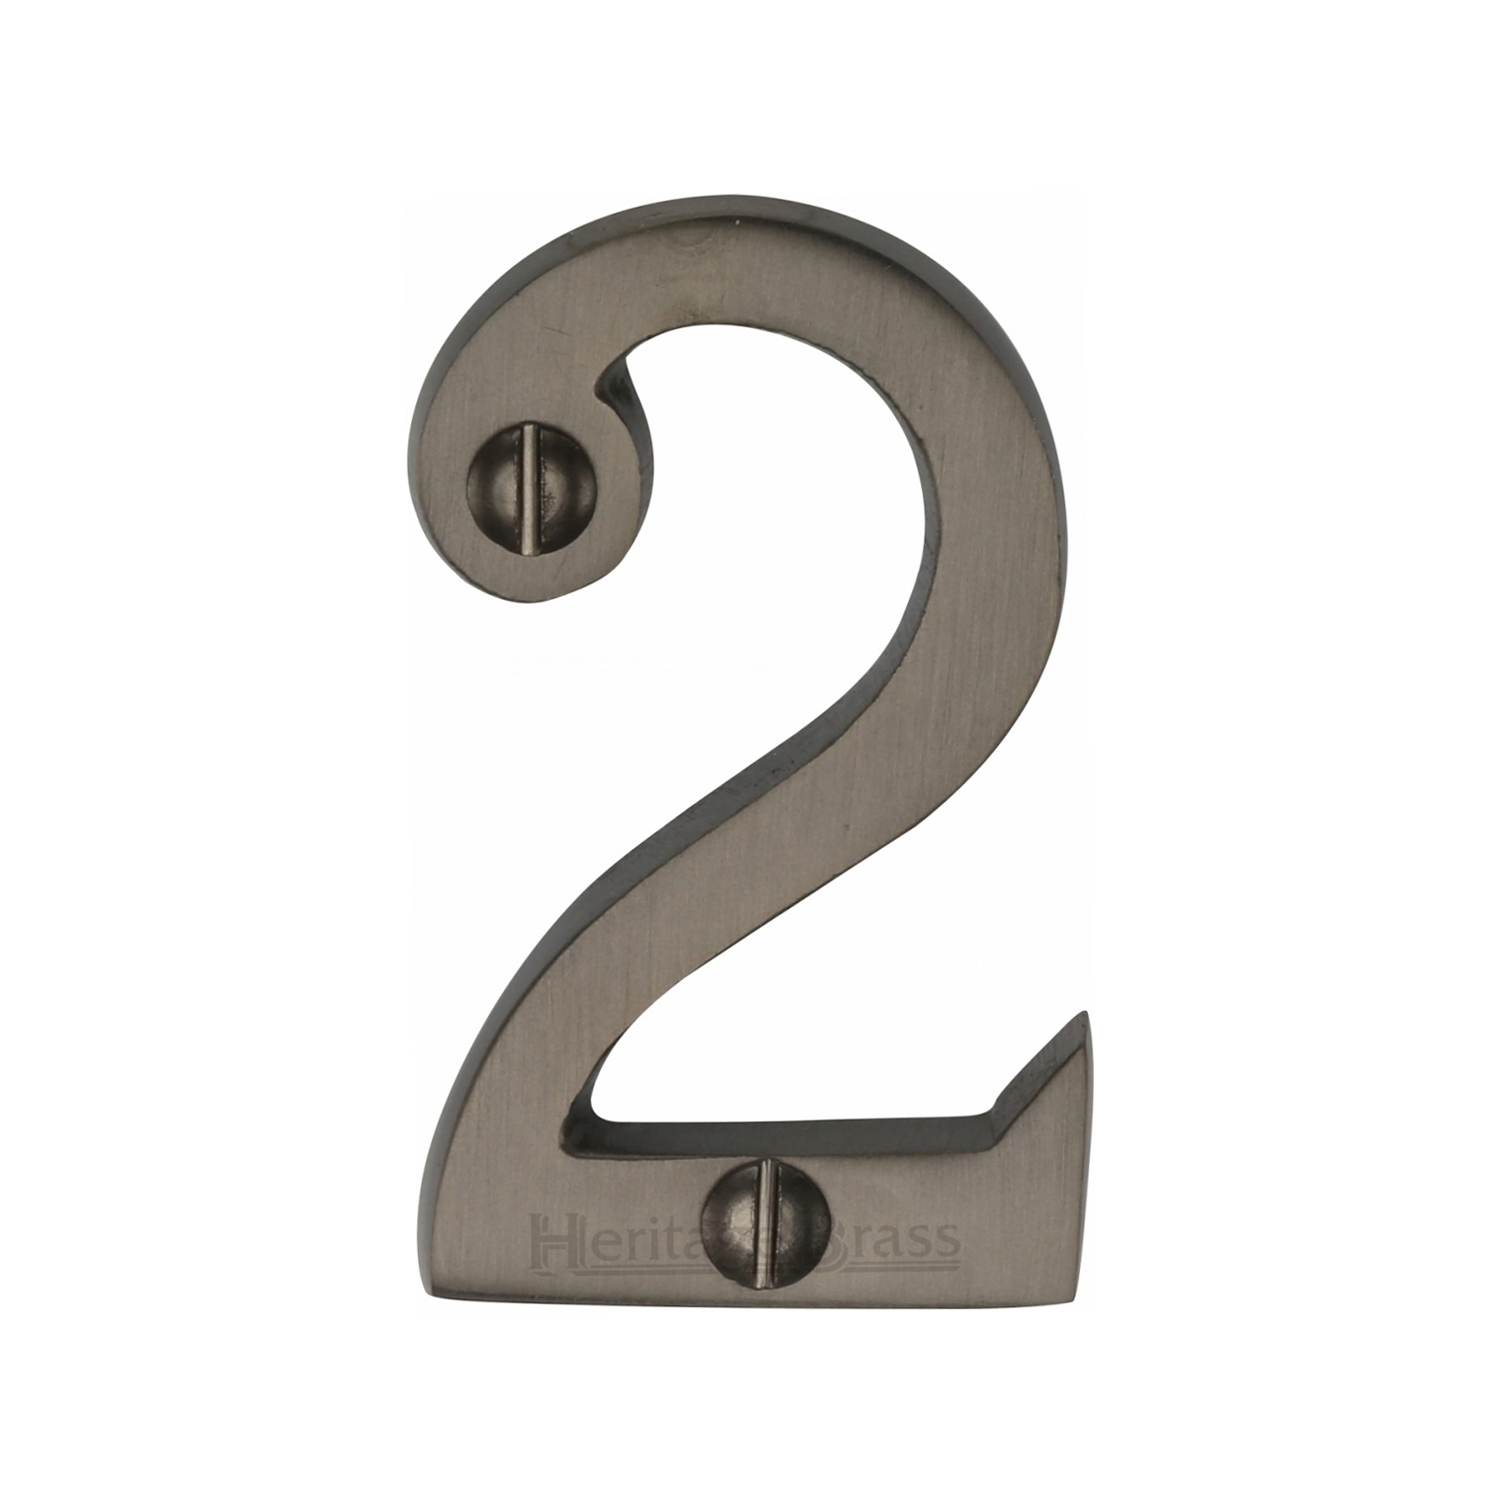 Heritage Brass Numeral 2 Face Fix 51mm (2")